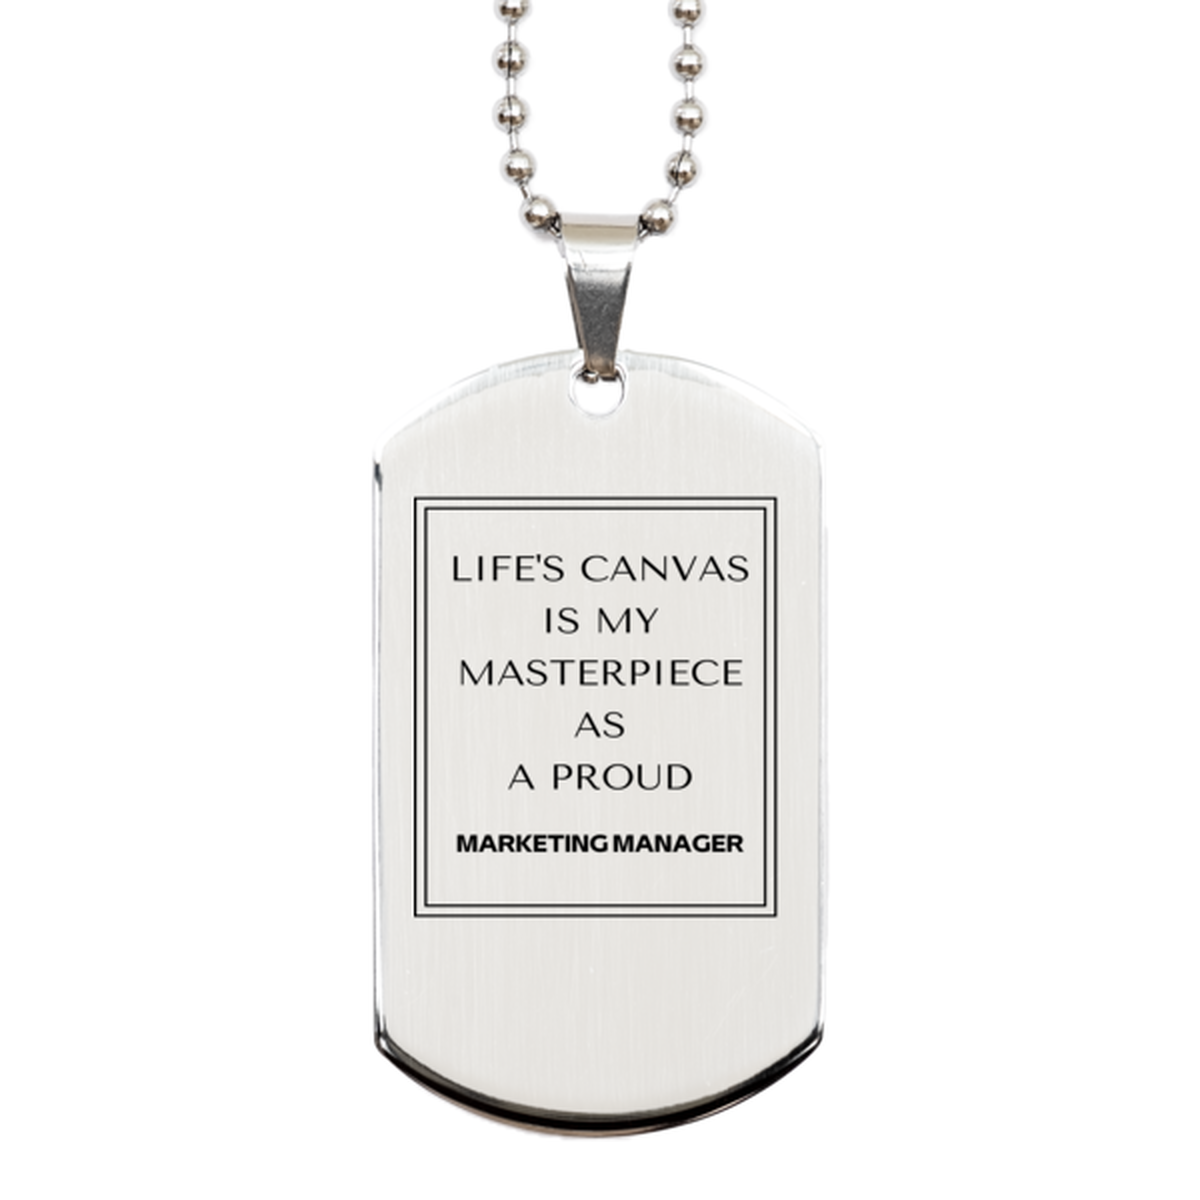 Proud Marketing Manager Gifts, Life's canvas is my masterpiece, Epic Birthday Christmas Unique Silver Dog Tag For Marketing Manager, Coworkers, Men, Women, Friends